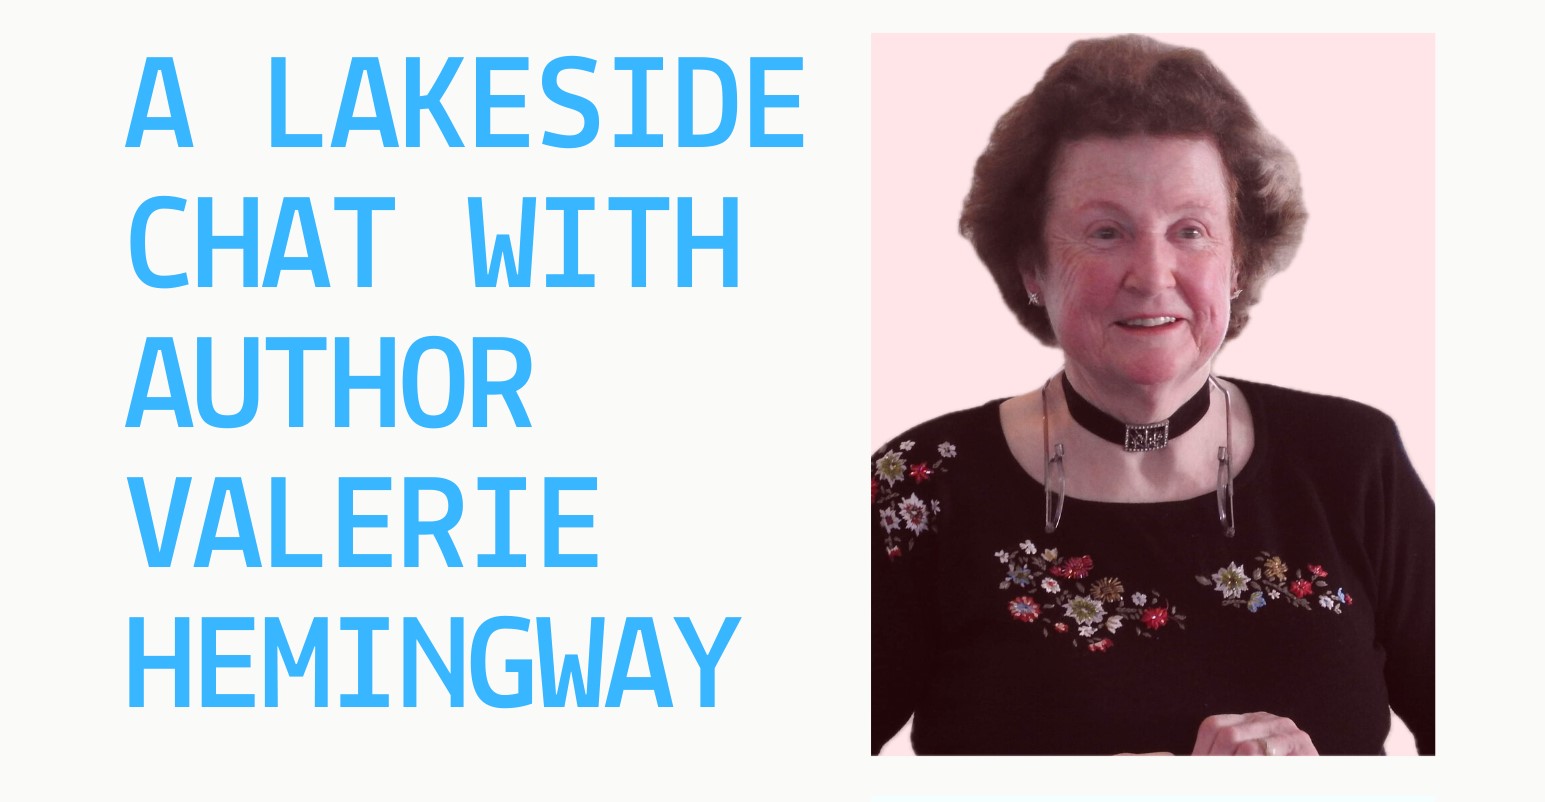 You are currently viewing A Lakeside Chat with Author Valerie Hemingway